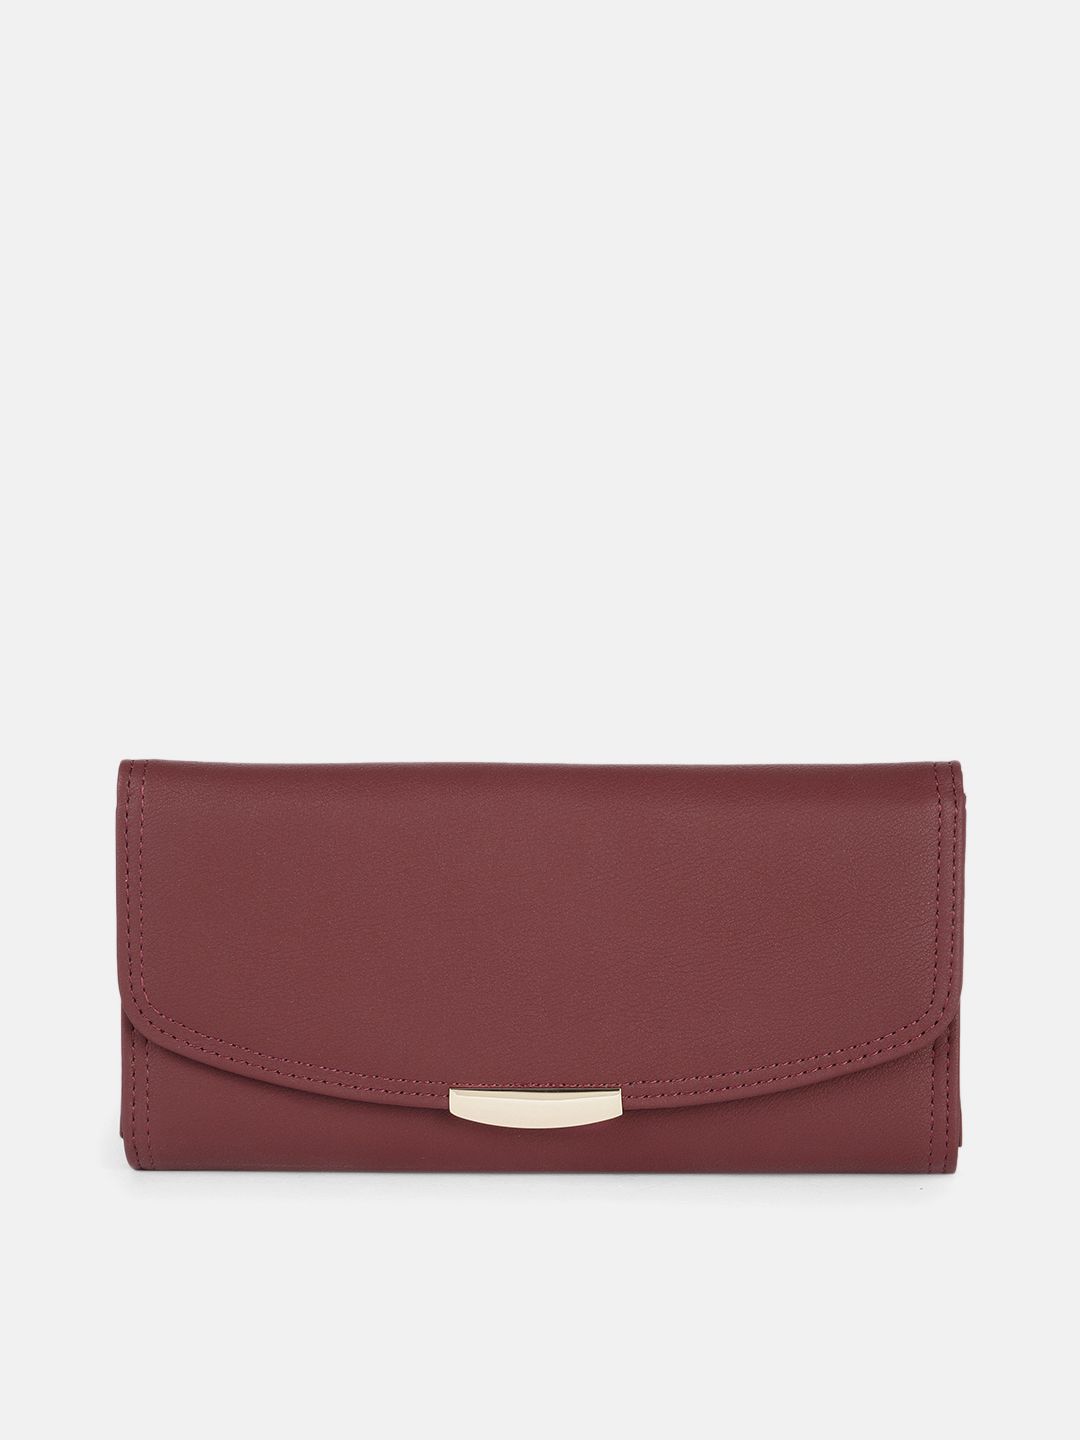 DressBerry Women Burgundy PU Two Fold Wallet Price in India